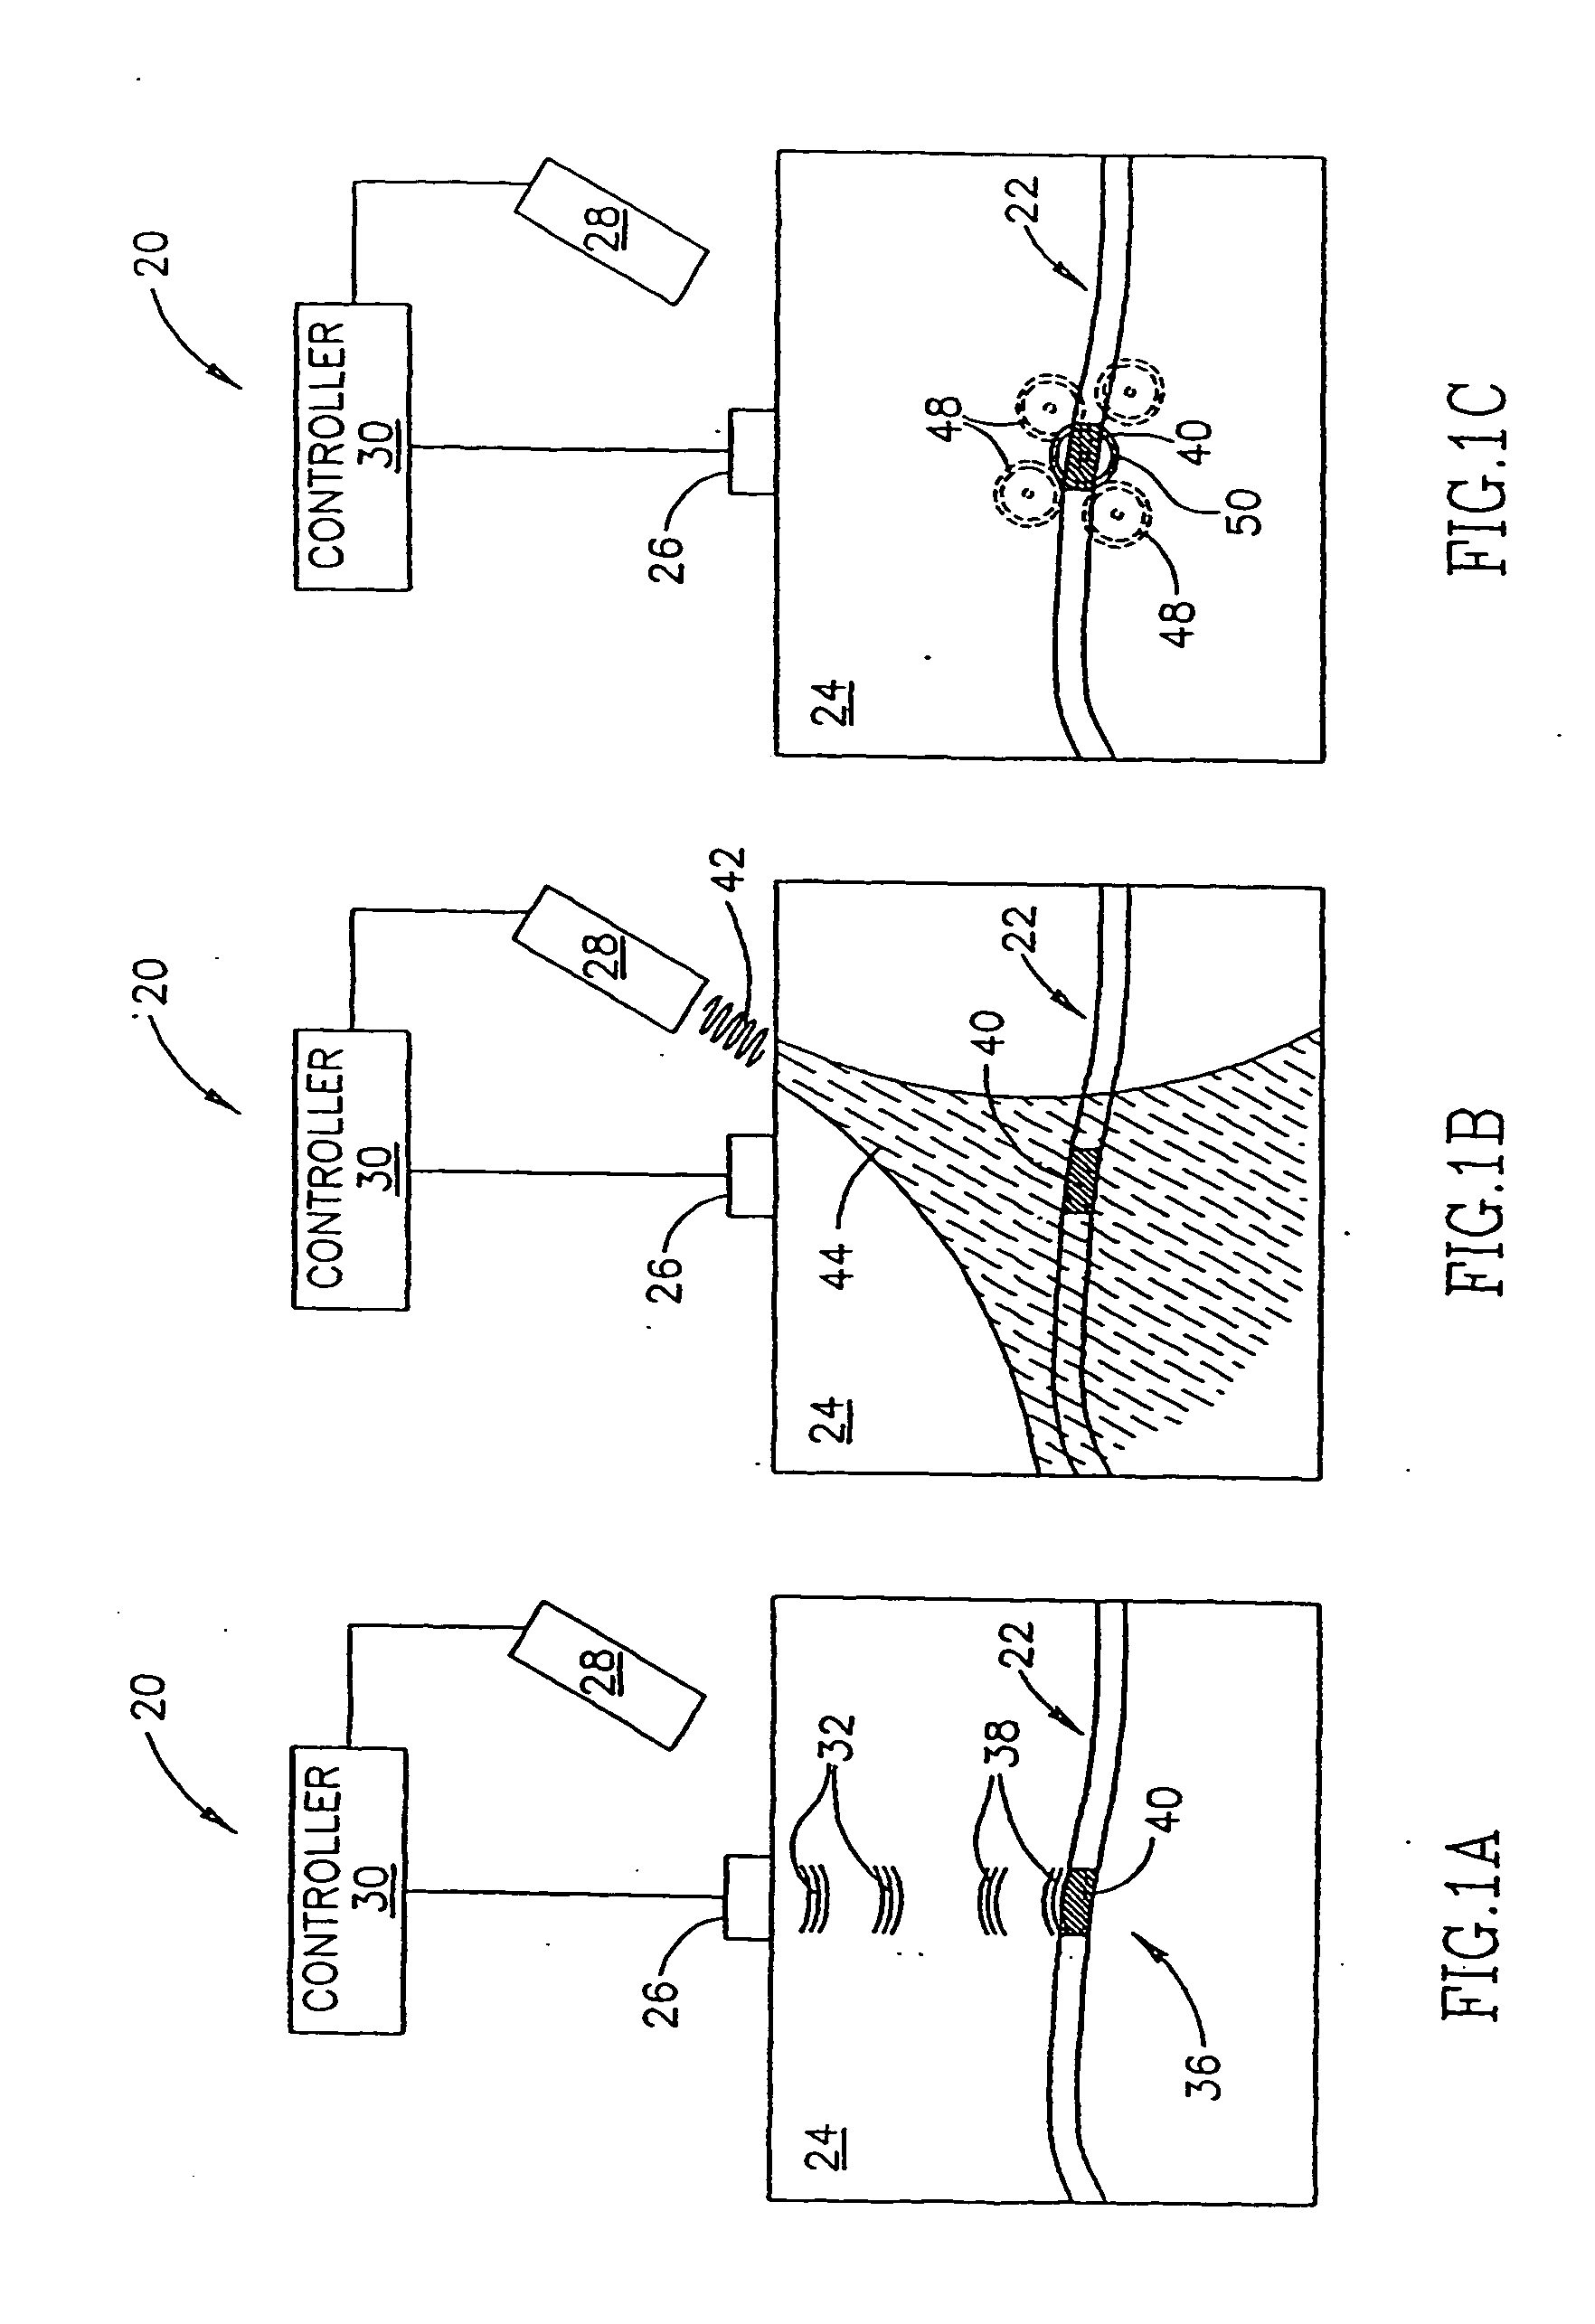 Photoacoustic assay and imaging system